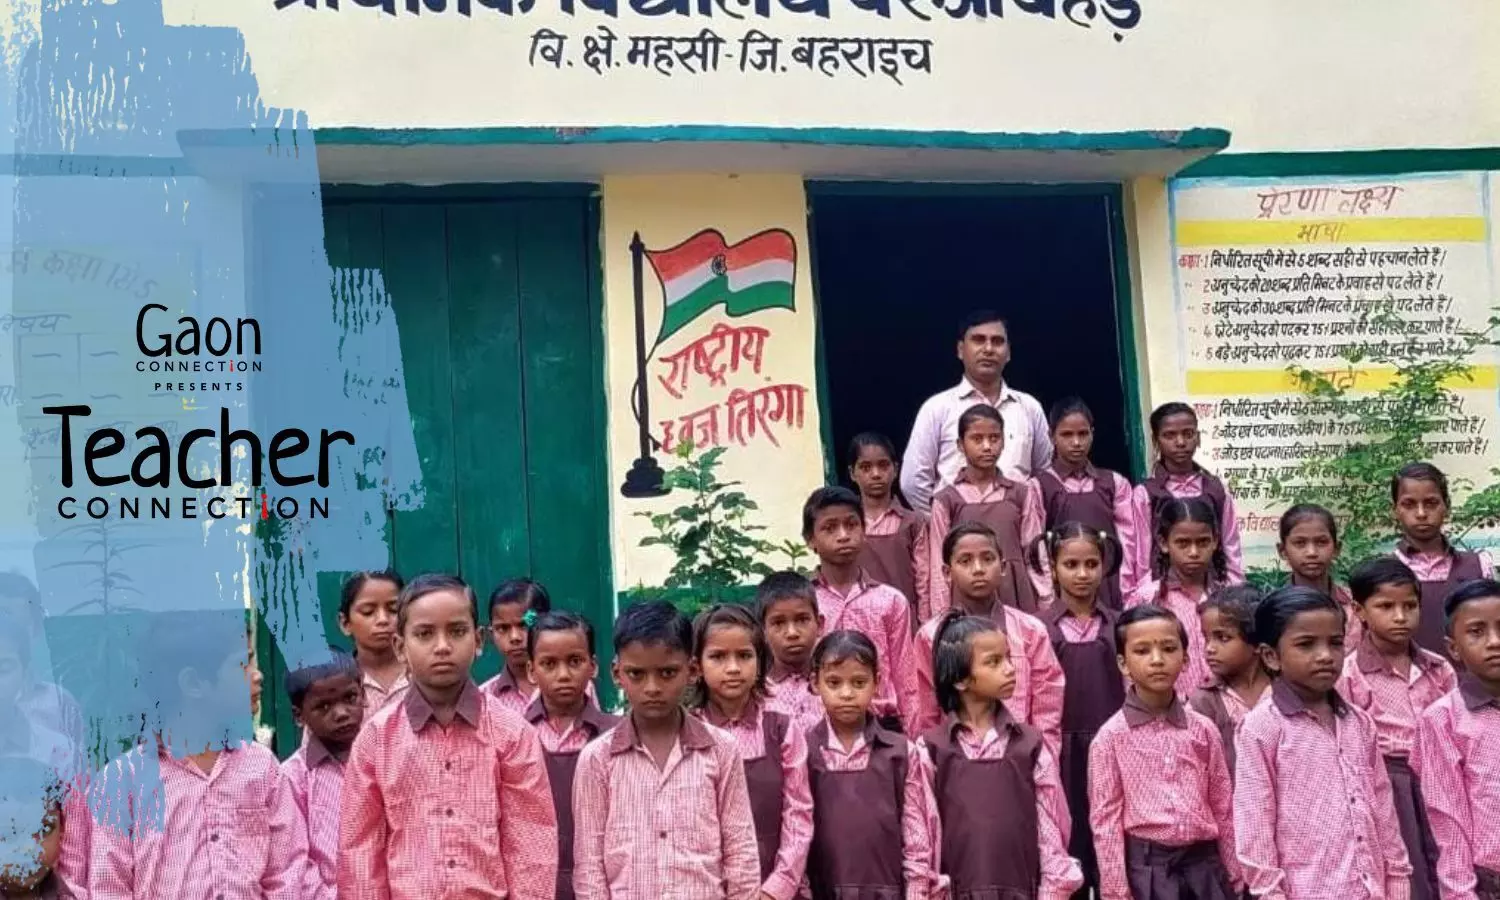 No teacher stayed in this school long enough, until Puran Lal Chaudhary came along